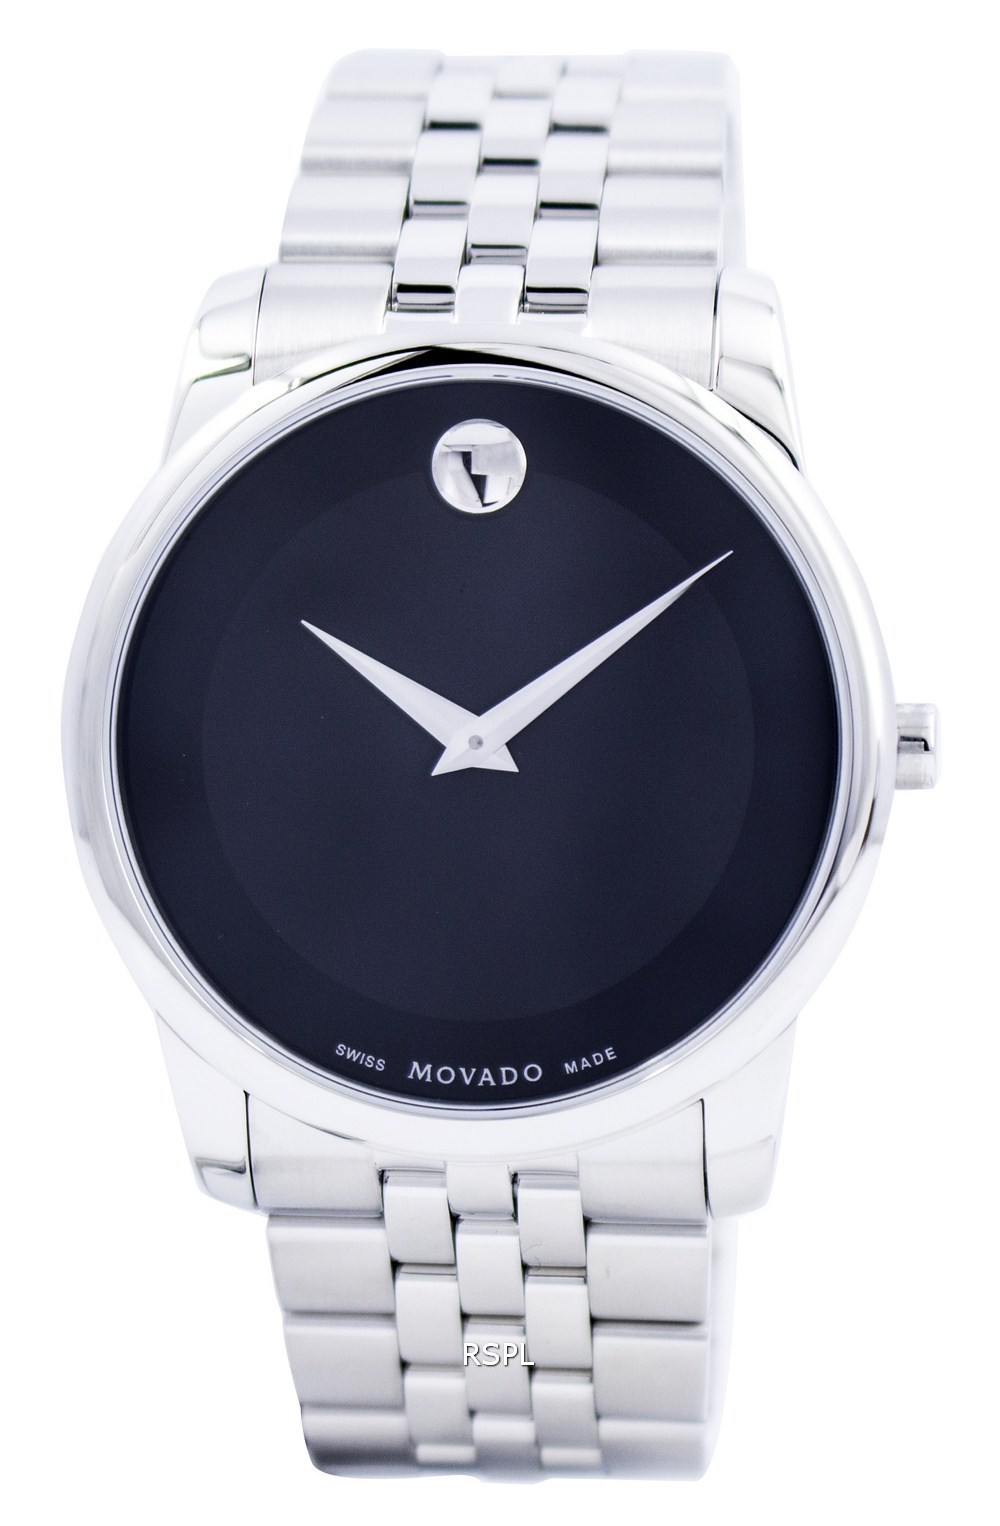 Movado Museum Classic Quartz Mens Watch.jpg  by creationwatches